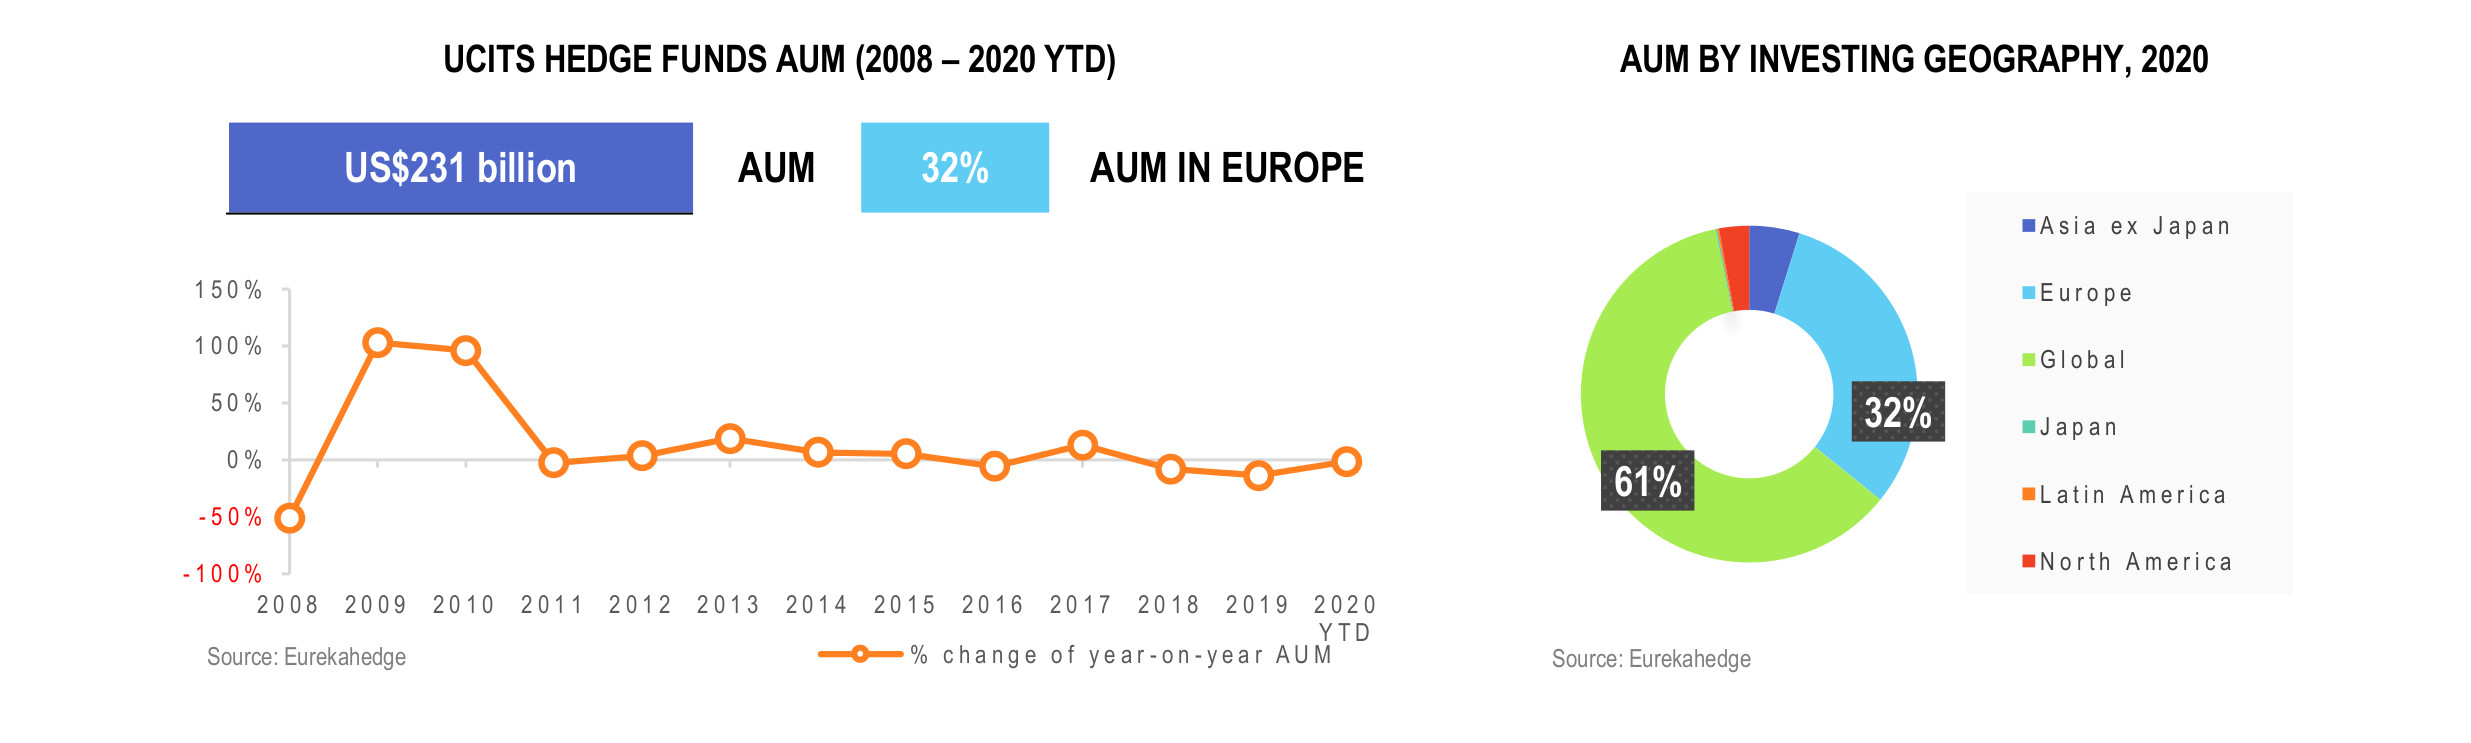 UCITS Hedge Funds Infographic April 2020 - AUM